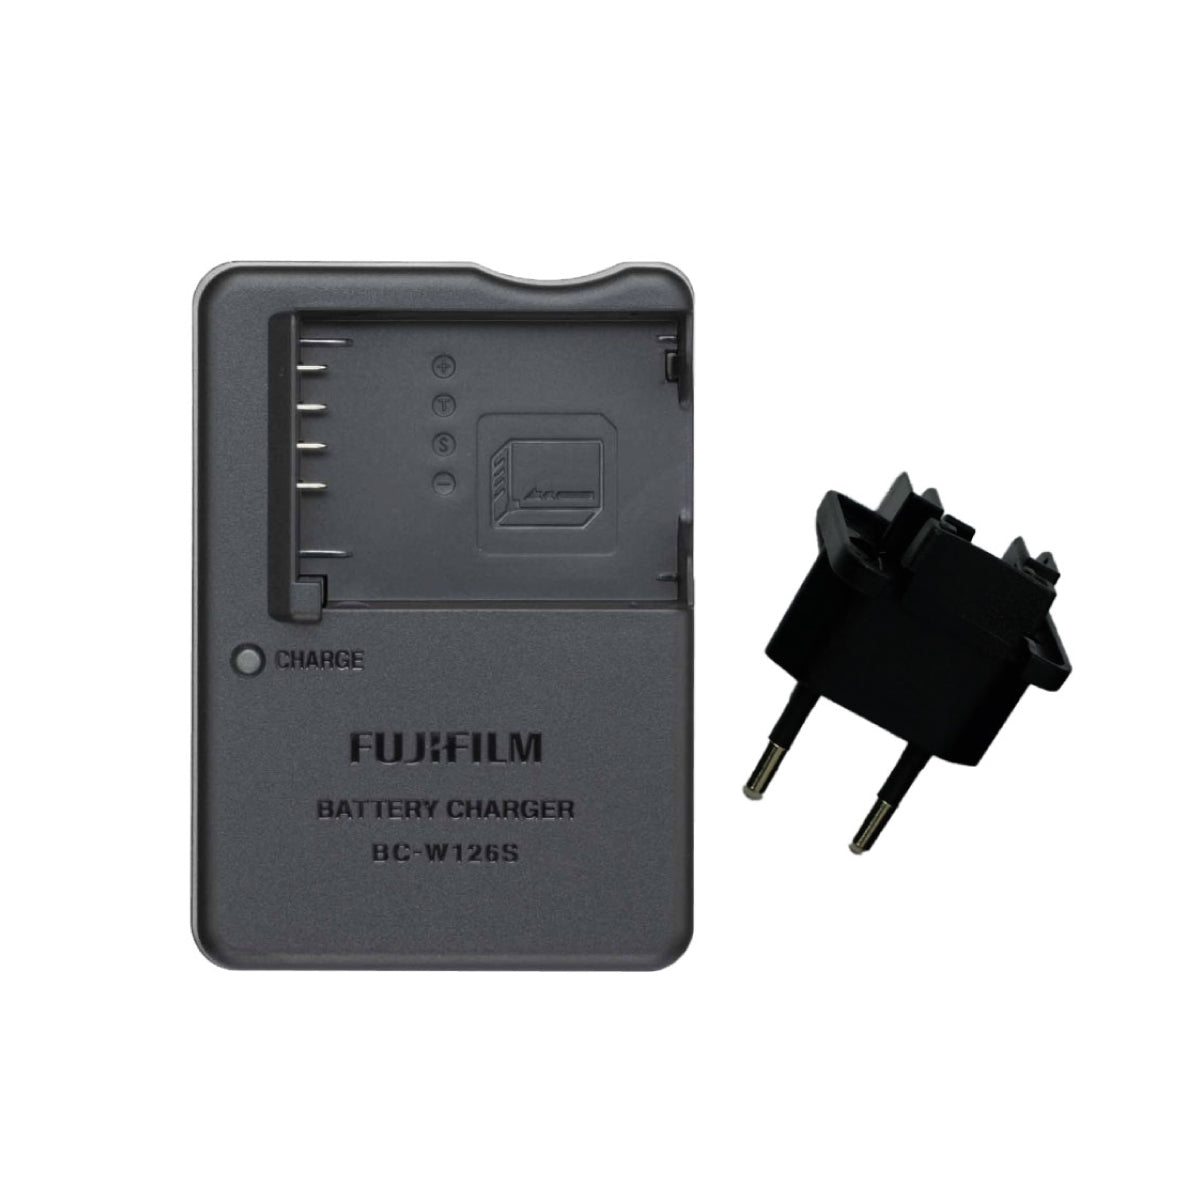 Fujifilm Battery Charger for NP-W126S (ไม่มีหัวปลั๊ก)